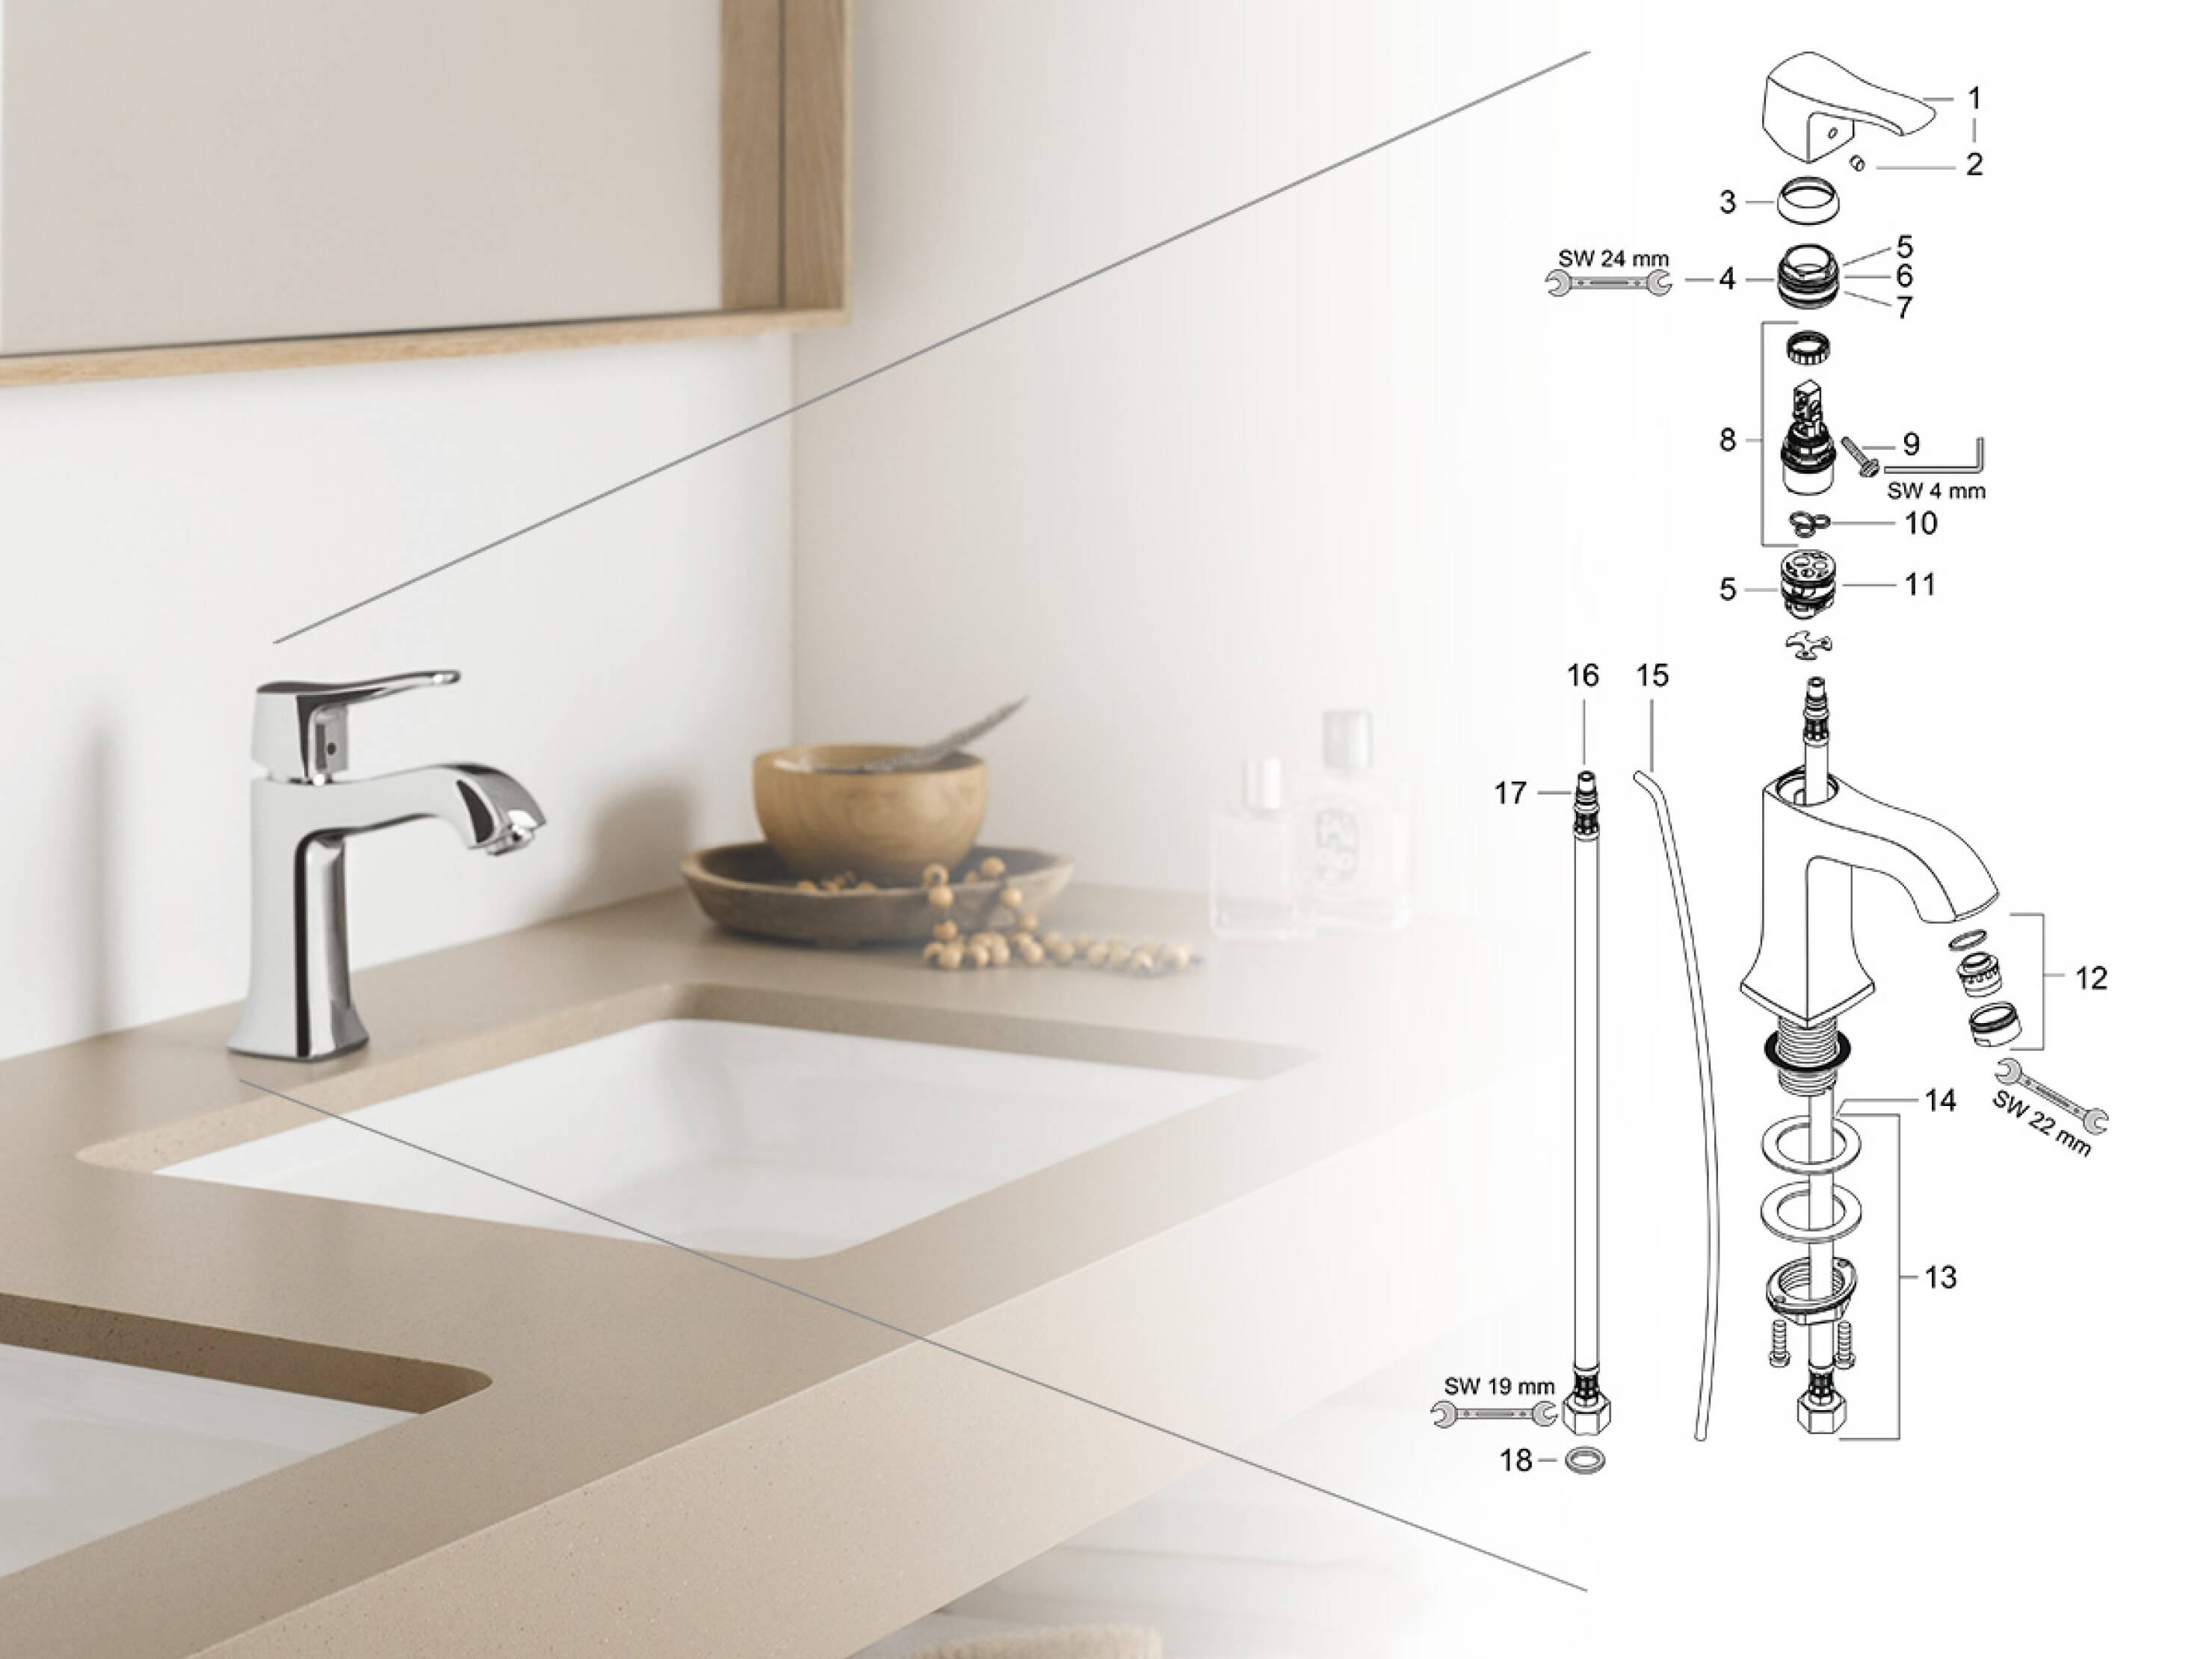 Search for hansgrohe Bathroom Spare Parts and Service Parts Online